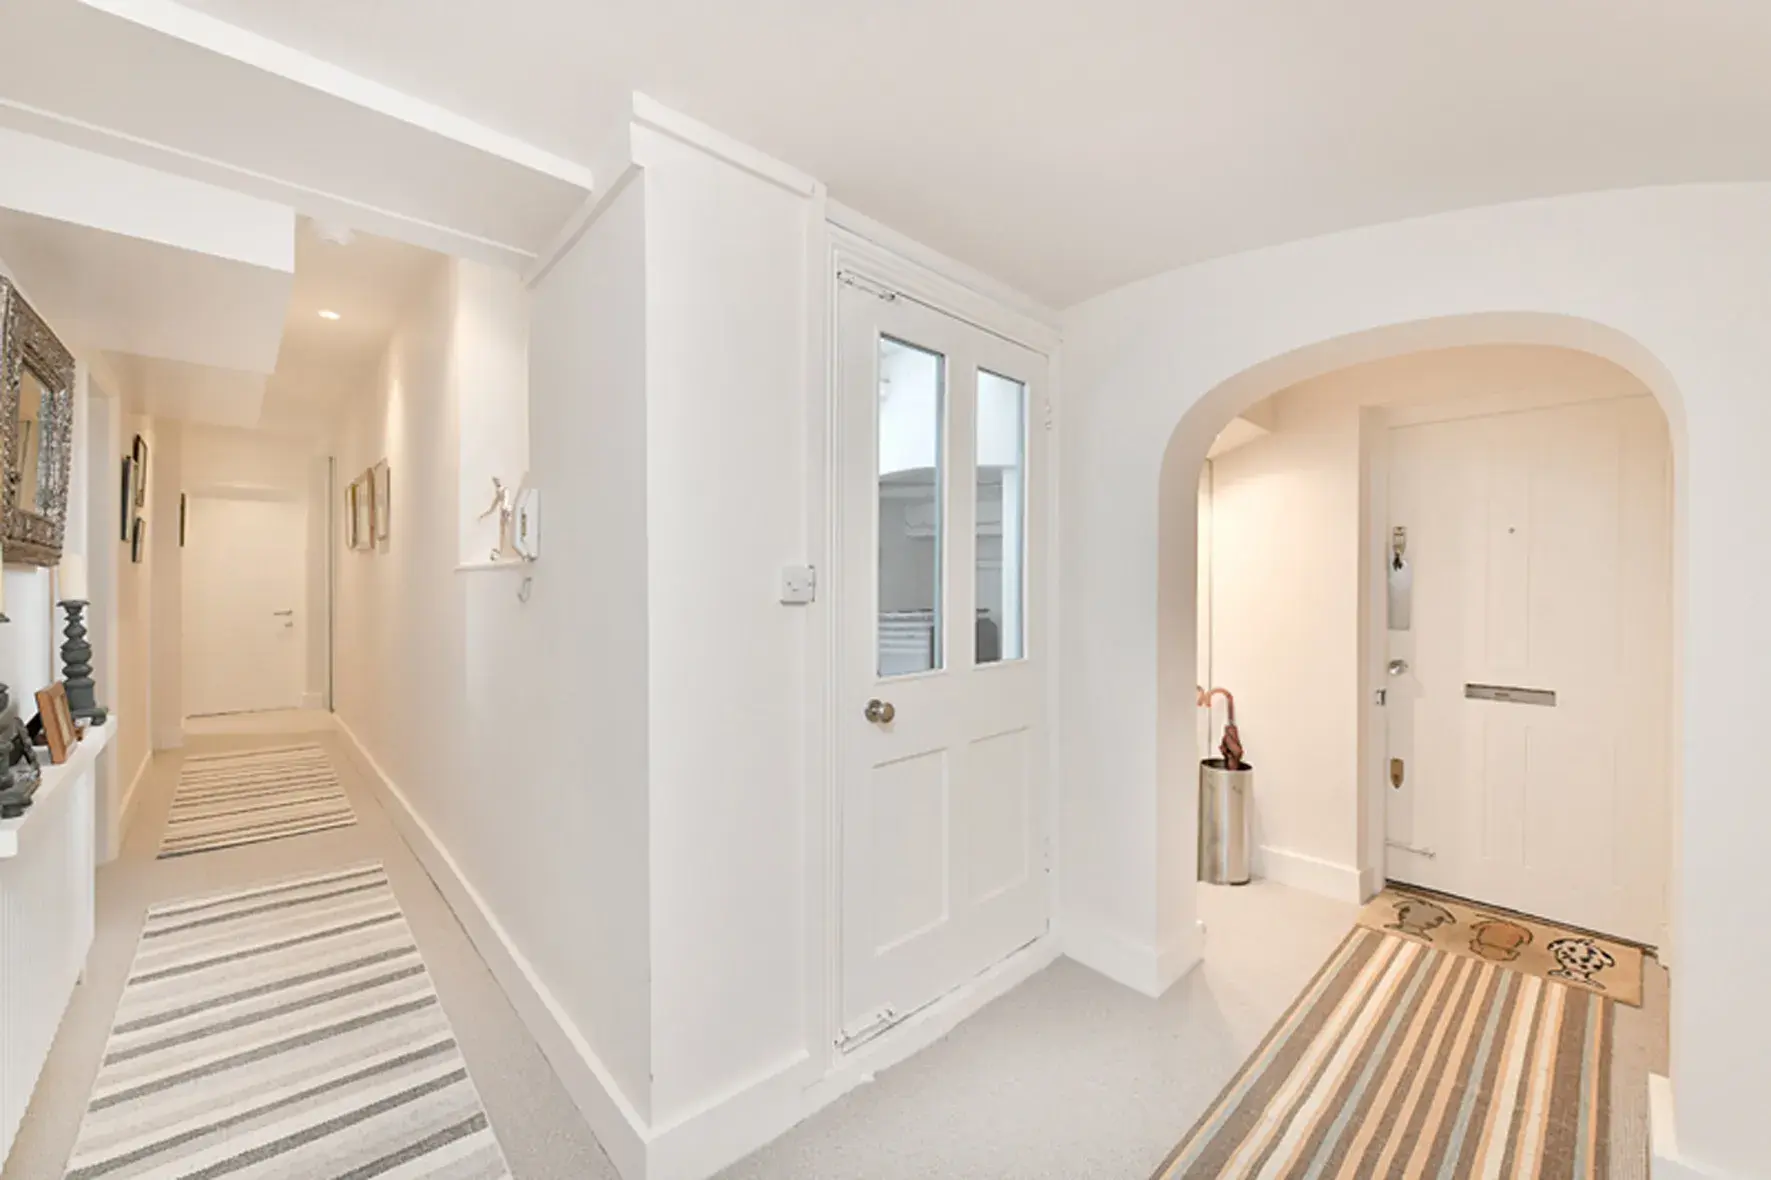 Collingham Road, holiday home in Kensington, London